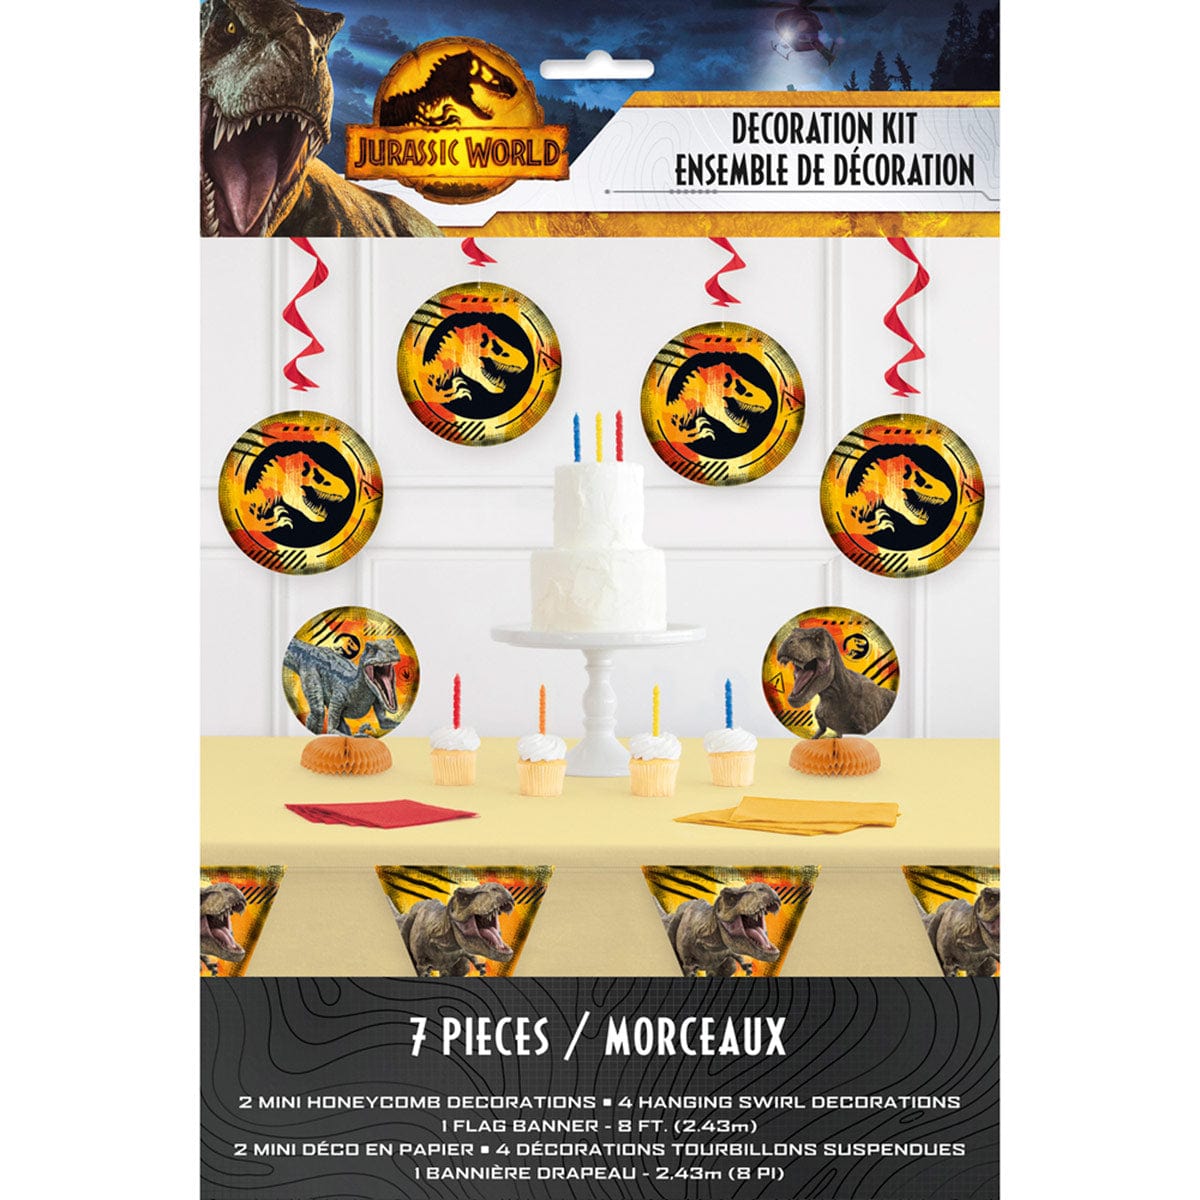 UNIQUE PARTY FAVORS Kids Birthday Jurassic World Birthday Party Decoration Kit with Dinosaurs